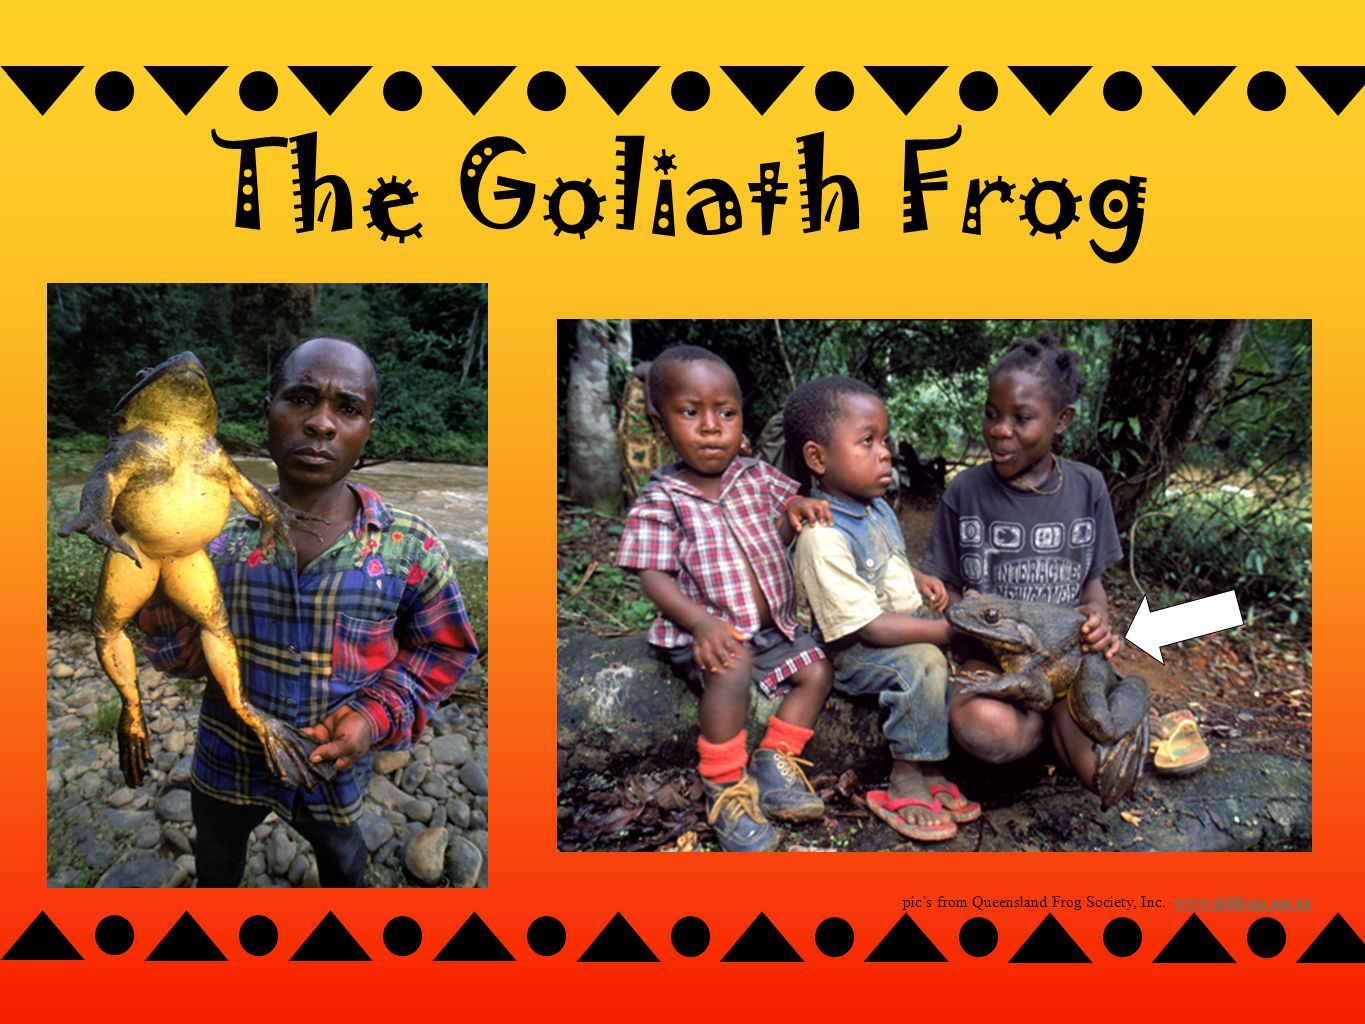 The Goliath Frog pic’s from Queensland Frog Society, Inc.